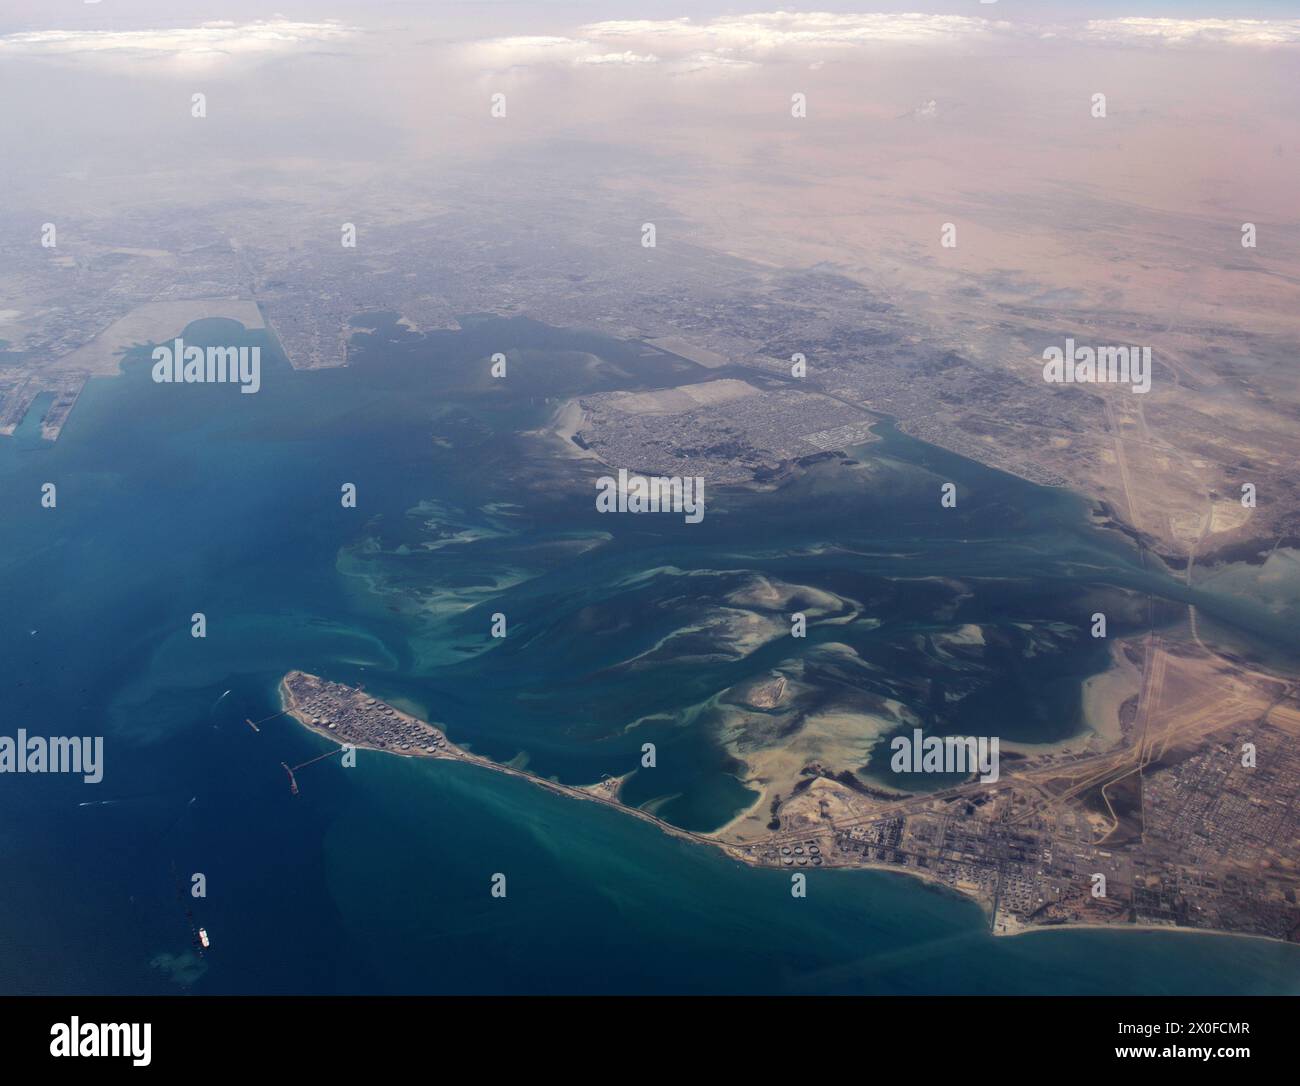 Aerial view of Ras Tanura and the Tarout Bay in Saudi Arabia. Stock Photo